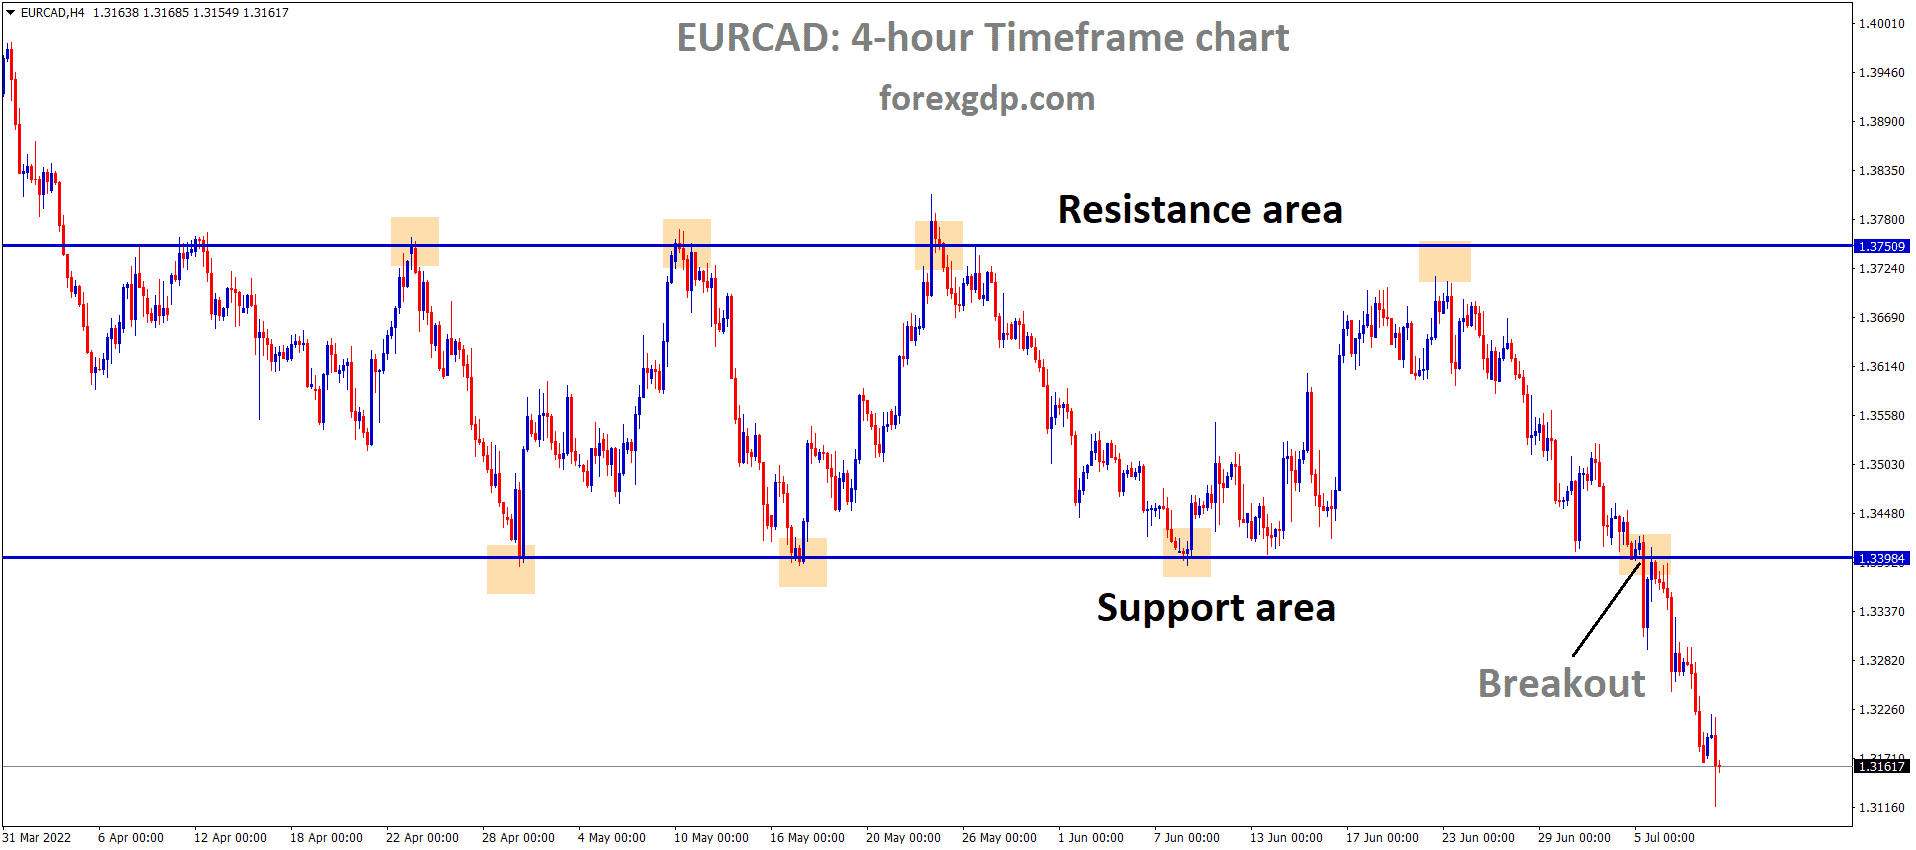 EURCAD has broken the horizontal Support area of the Box Pattern.